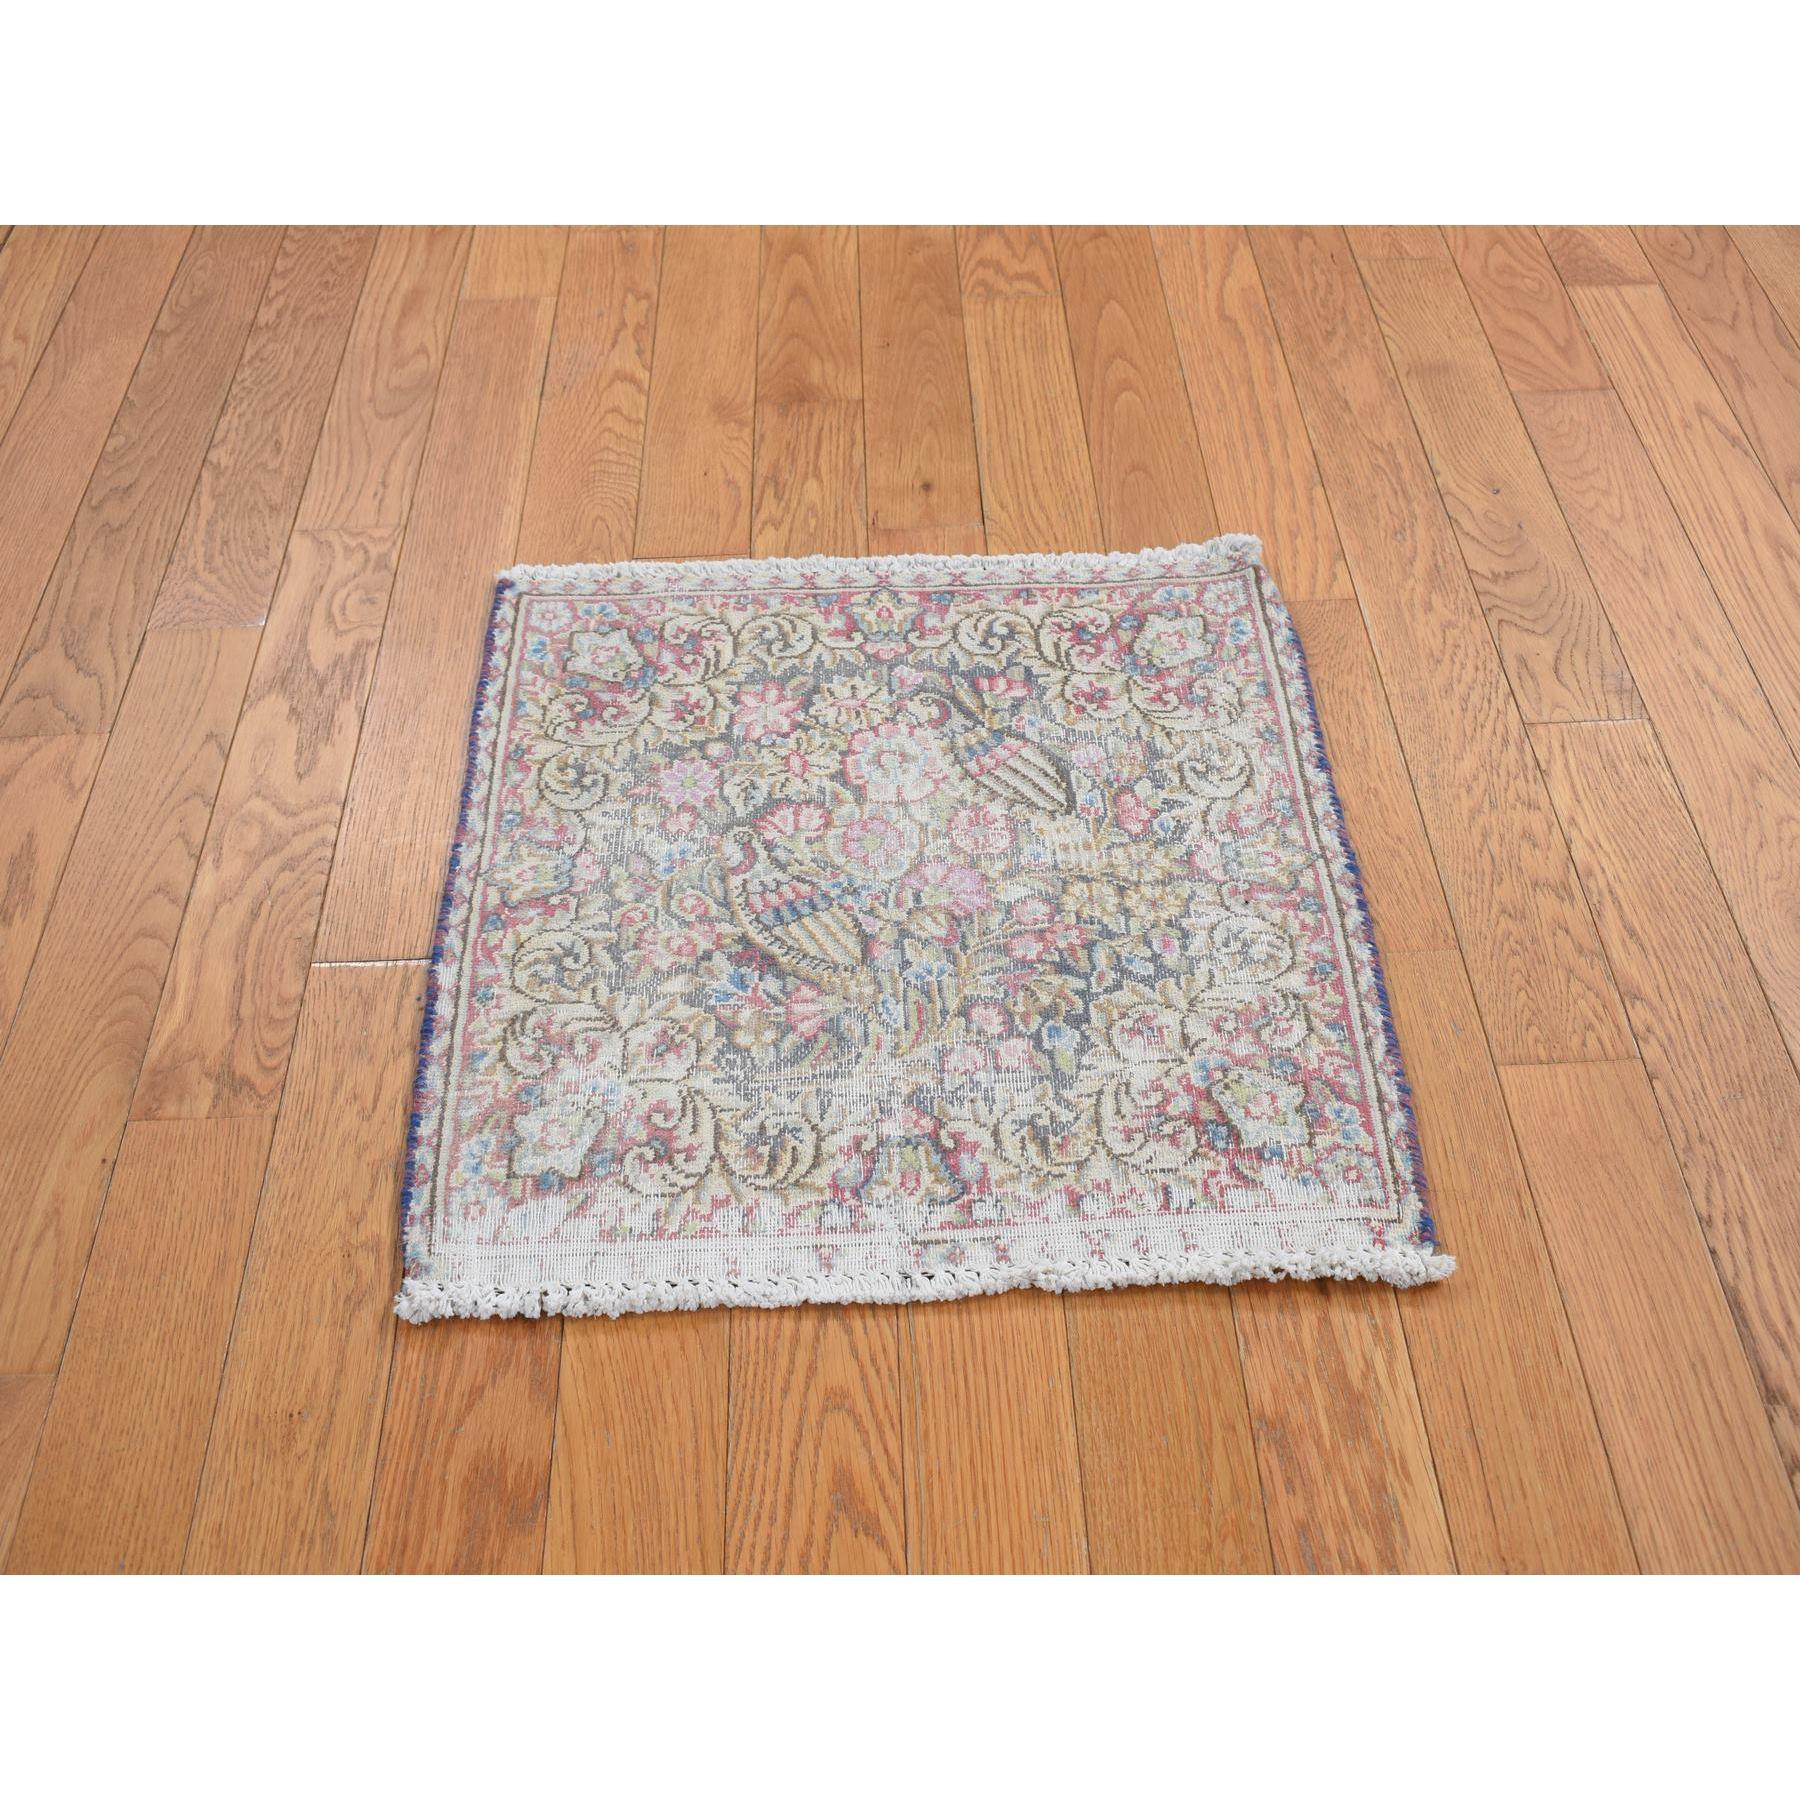 This fabulous Hand-Knotted carpet has been created and designed for extra strength and durability. This rug has been handcrafted for weeks in the traditional method that is used to make
Exact Rug Size in Feet and Inches : 1'9